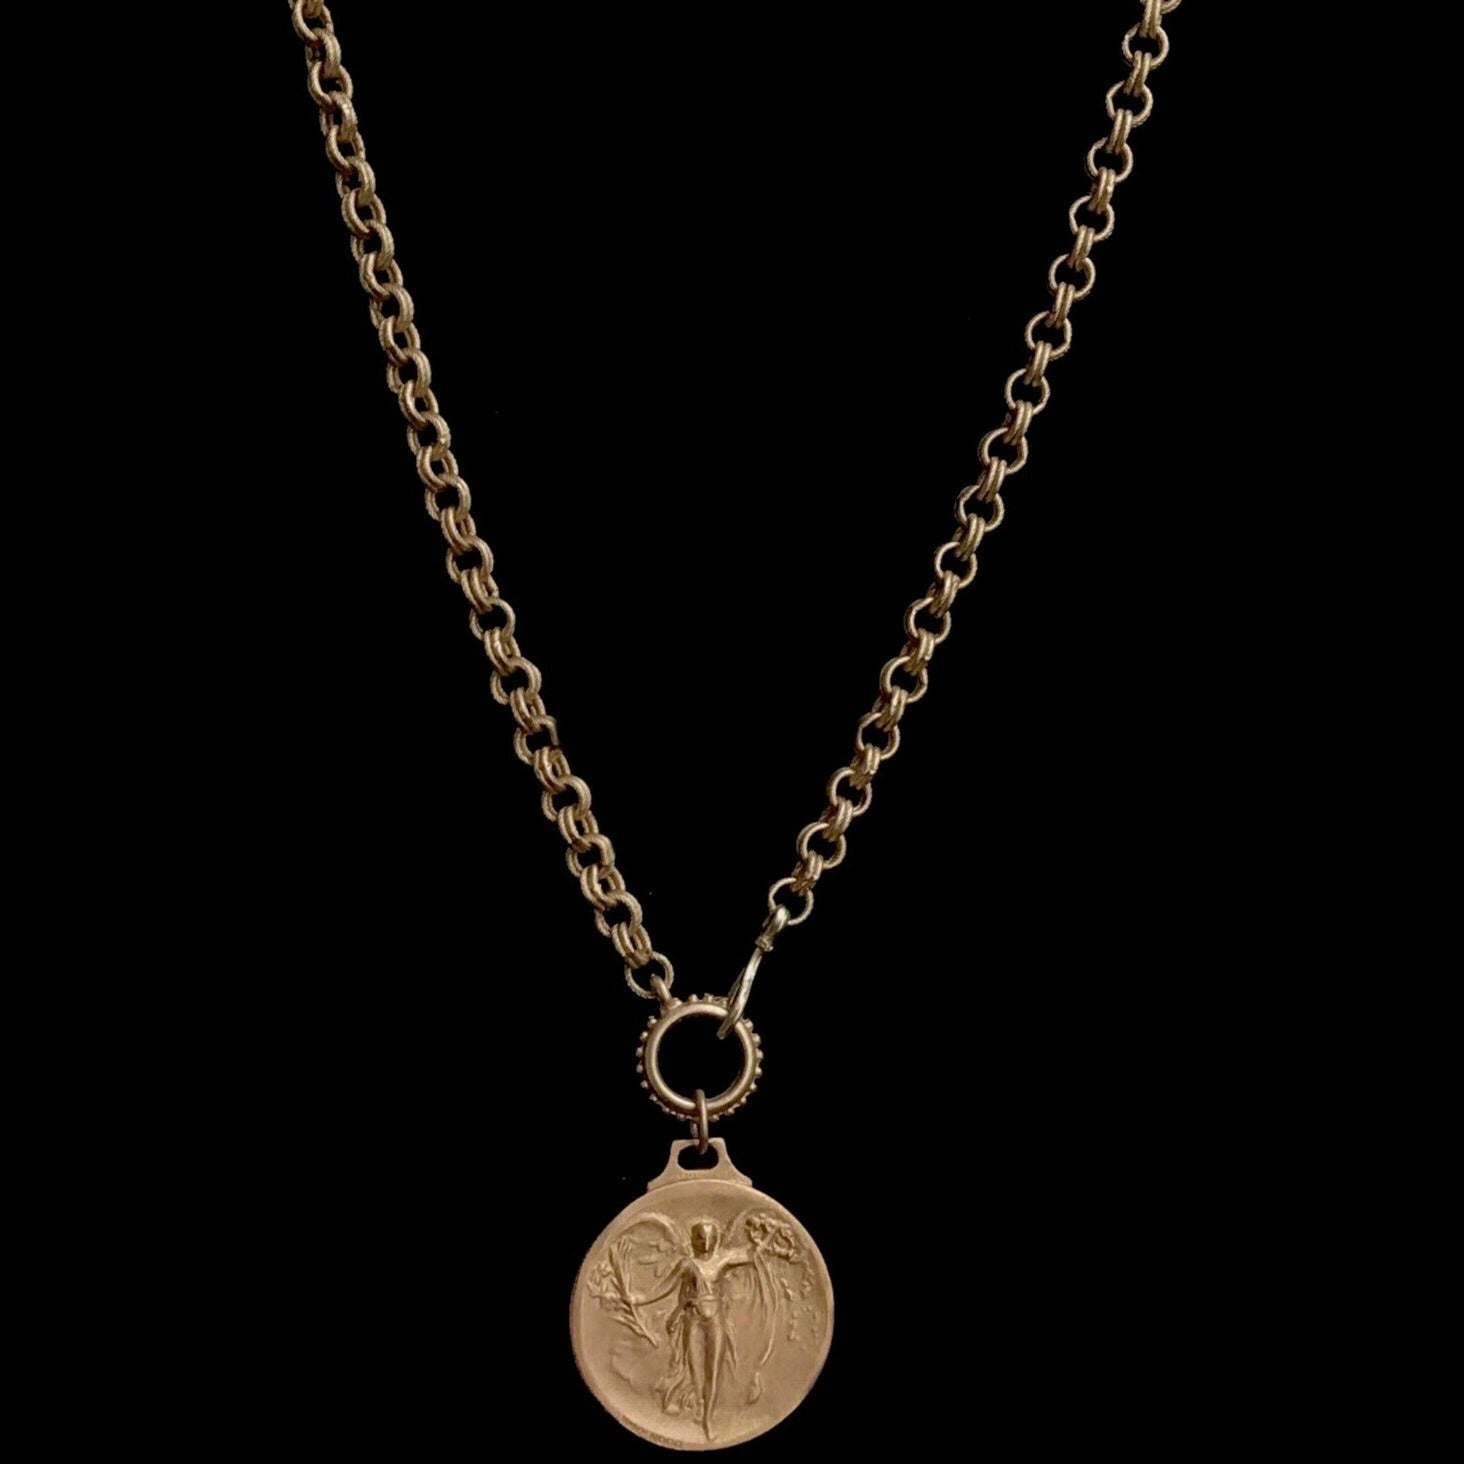 Nike the Goddess of Victory Double Cable Chain Necklace - Whispering Cowgirl